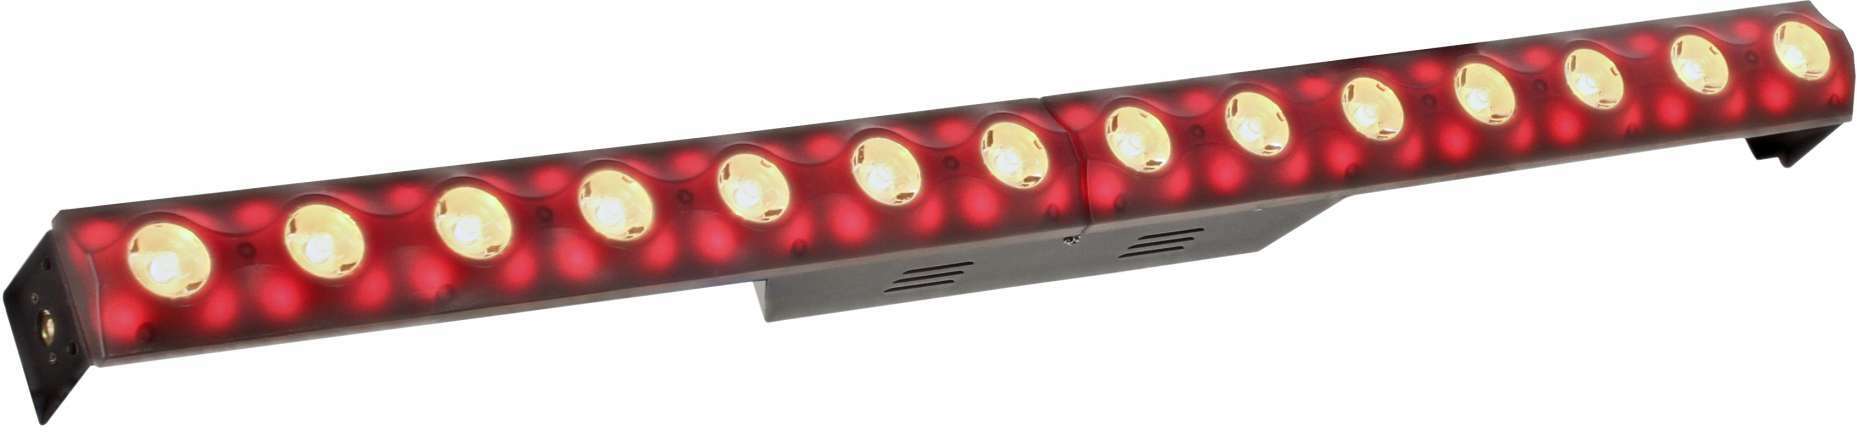 Power Lighting Barre Led 14x3w Crystal - Barra de LED - Main picture